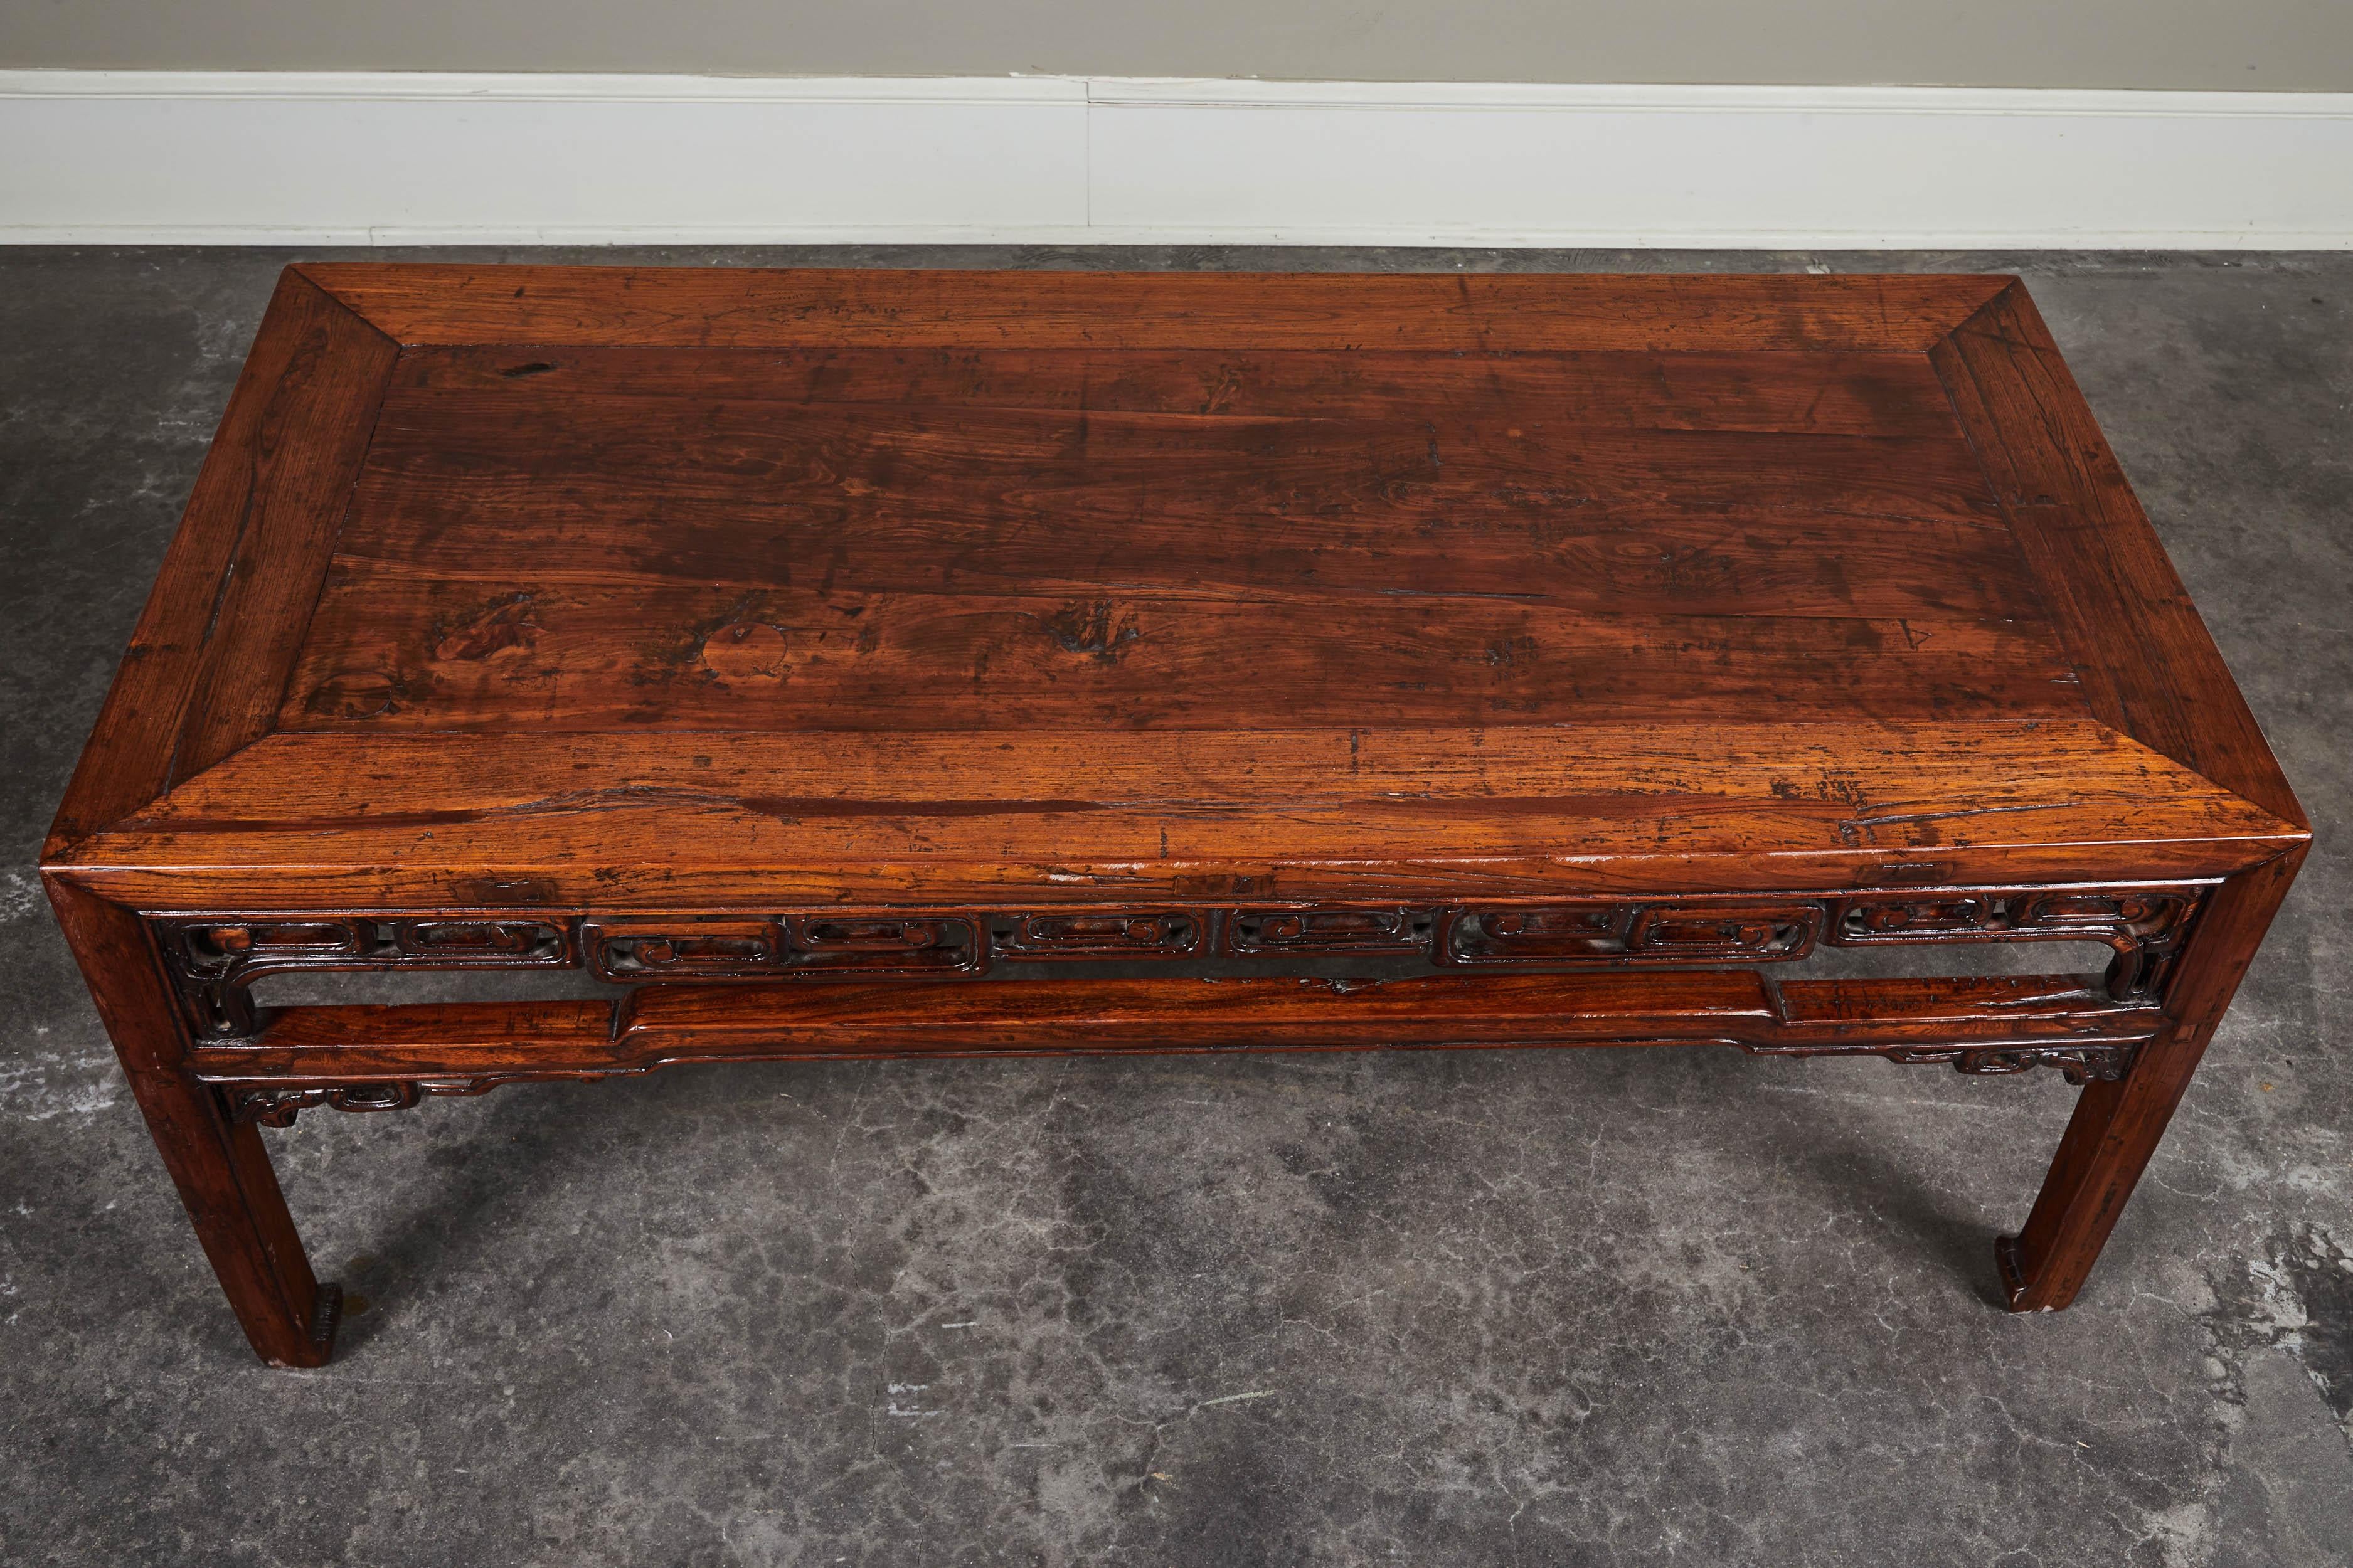 Perfect Ming style kang table (from the book of Ming furniture) in elm from Shanshi, circa 17th-18th century.